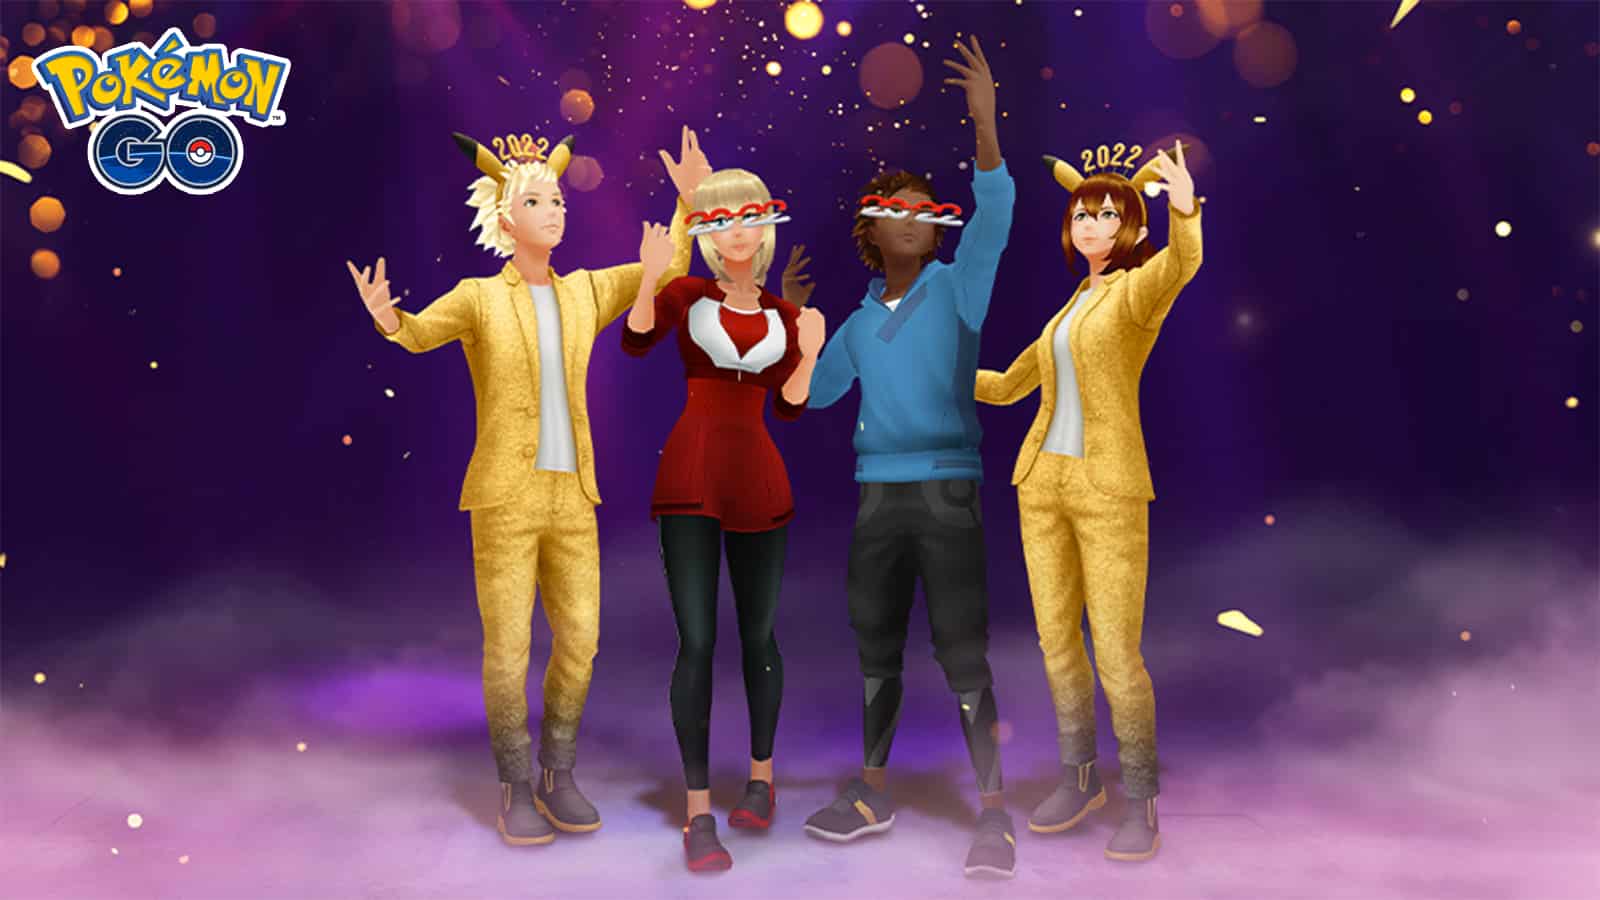 Trainers celebrating the New Year's 2022 event Timed Research tasks and rewards